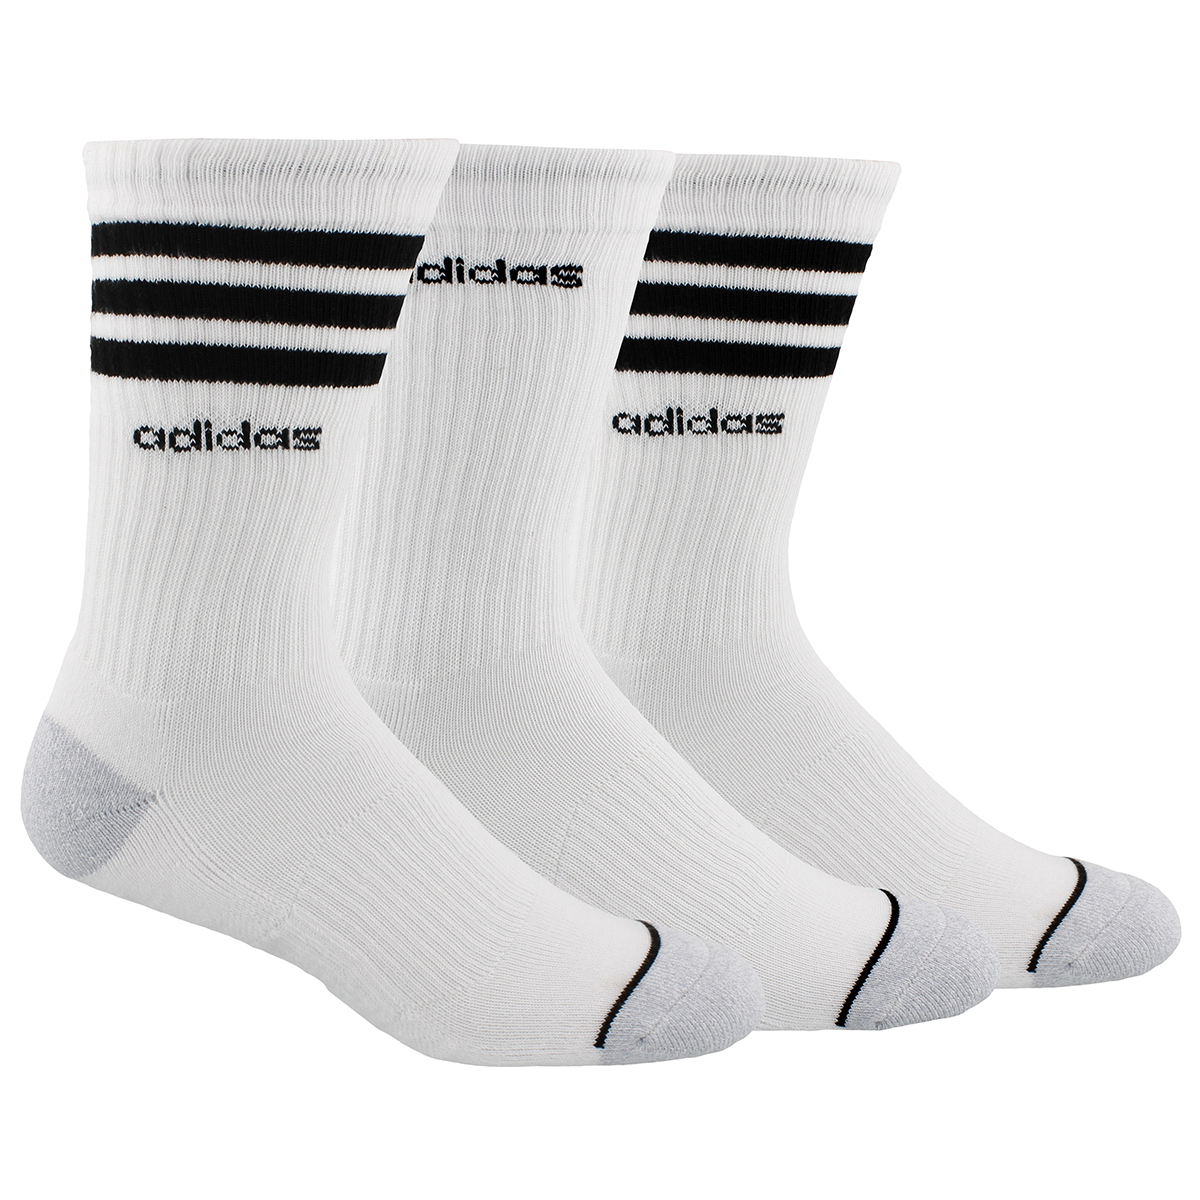 Adidas Men's Cushioned Color Crew Socks, 3-Pack - White, 10-13